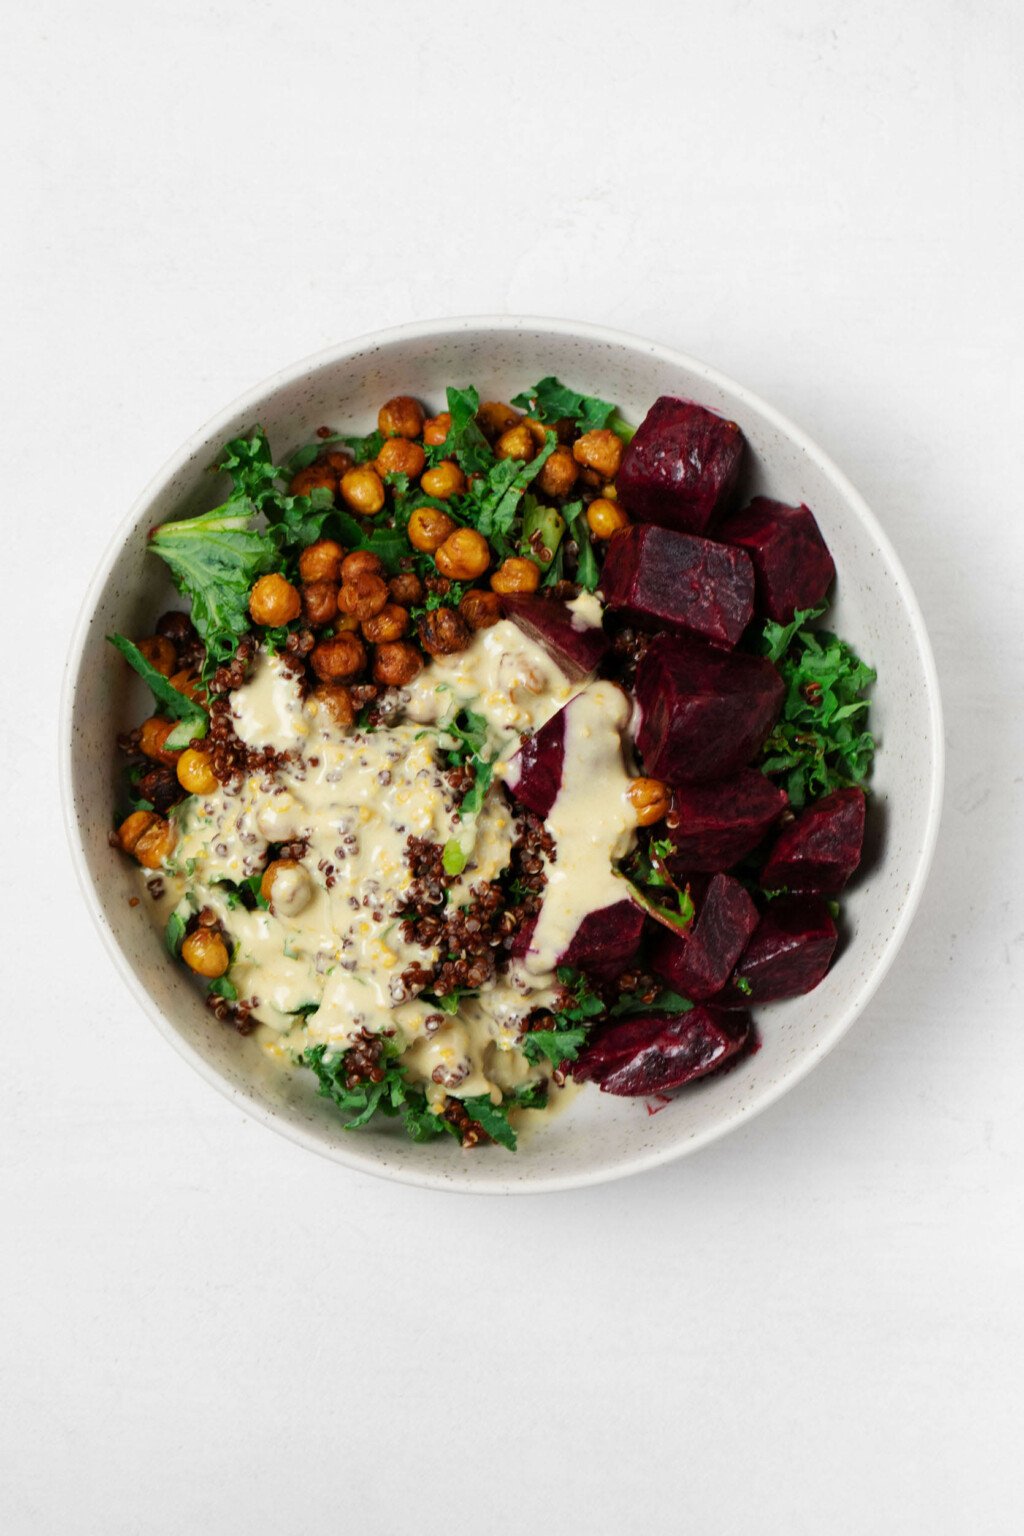 A round, white ceramic bowl holds cooked quinoa, chickpeas, beets, and finely chopped kale.